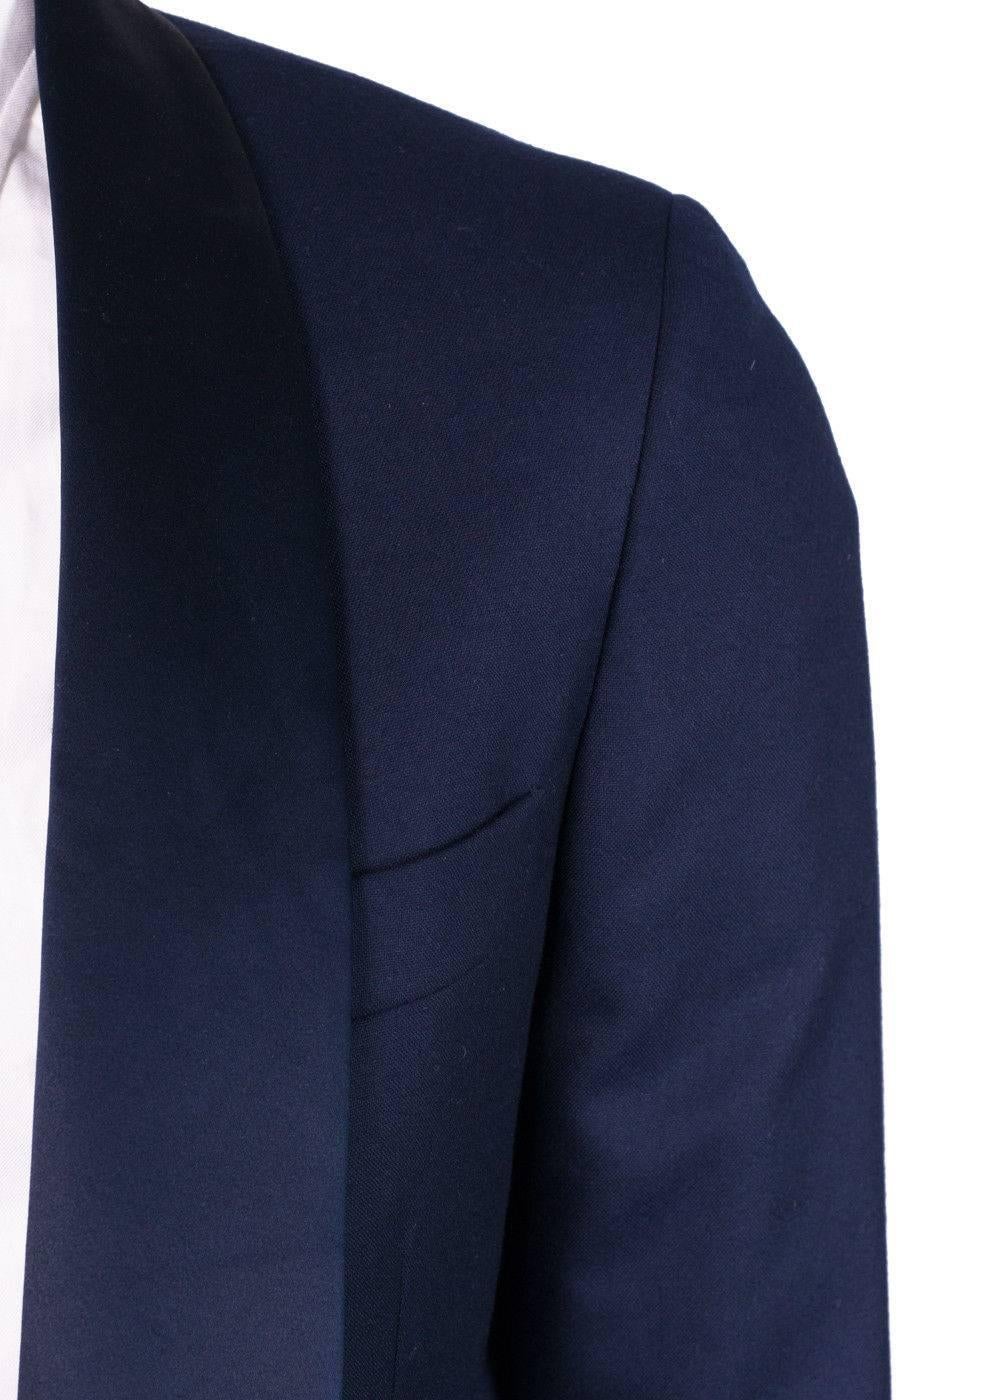 Brand New Brunello Cucinelli Satin Lapel Suit
Original Tags & Hanger Included
Retails in Stores & Online for $7795
Men's Size EUR 48 R / US 38 R Fits True to Size

Adopt that air of deserving confidence in your Brunello Cucinelli Suit Jacket. This